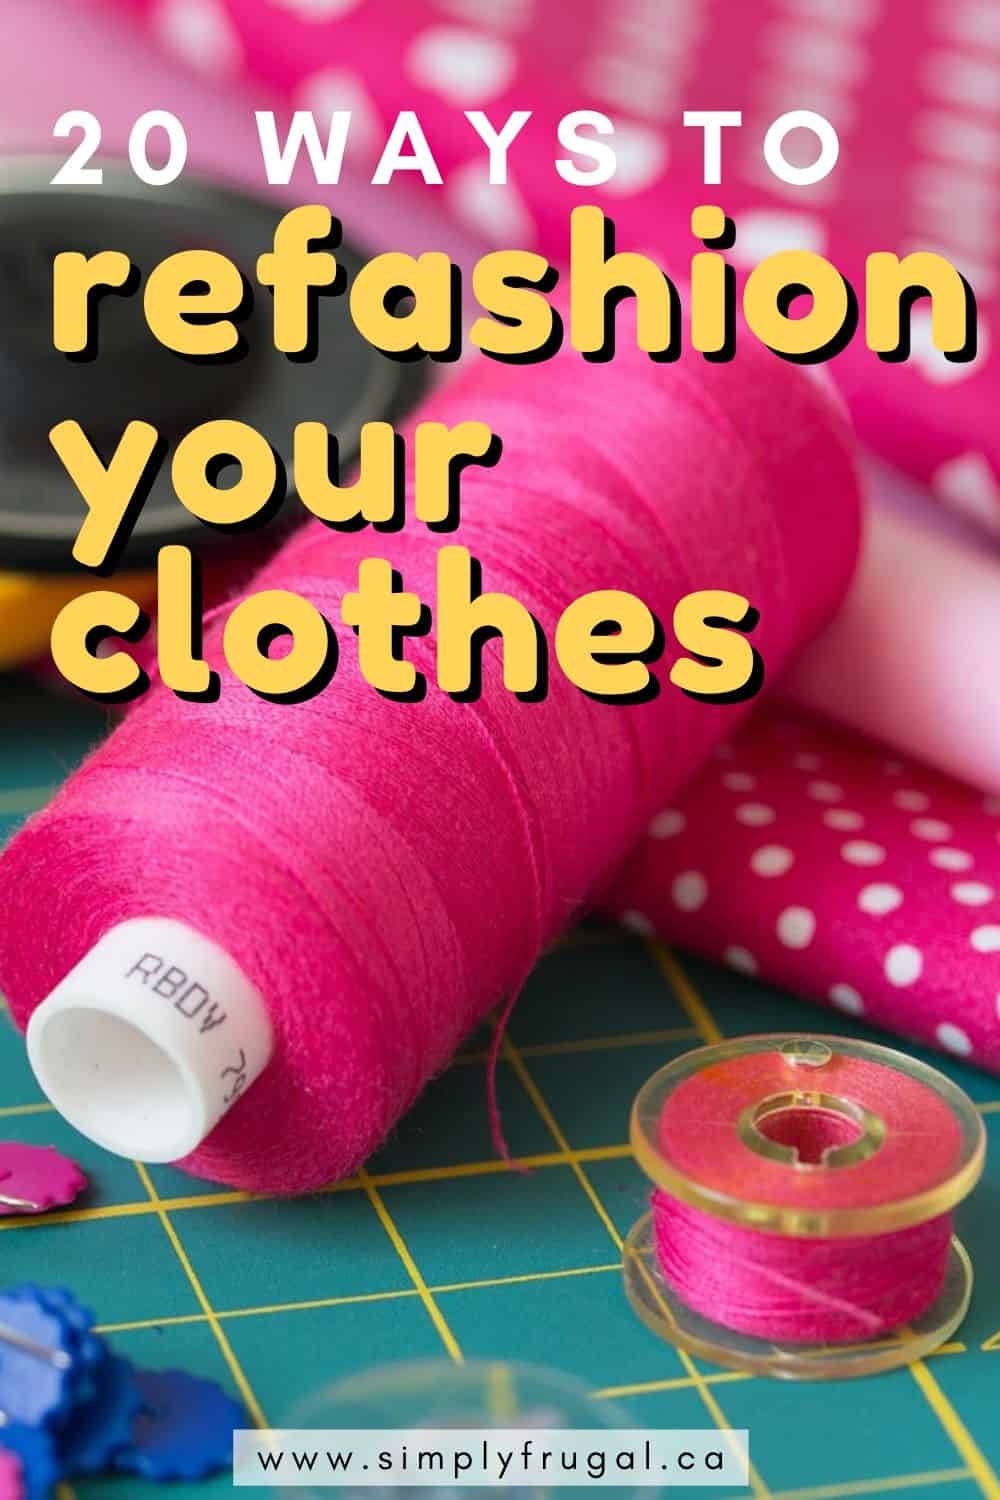 20 Ways to Refashion or upcycle your old Clothes. Forget buying brand new clothes! Check out these DIY sewing ideas for refashioning clothes you may already own. You'll be sure to find a tutorial for a new dress, shirt or whatever you fancy! #upcycle #refashion #sewing